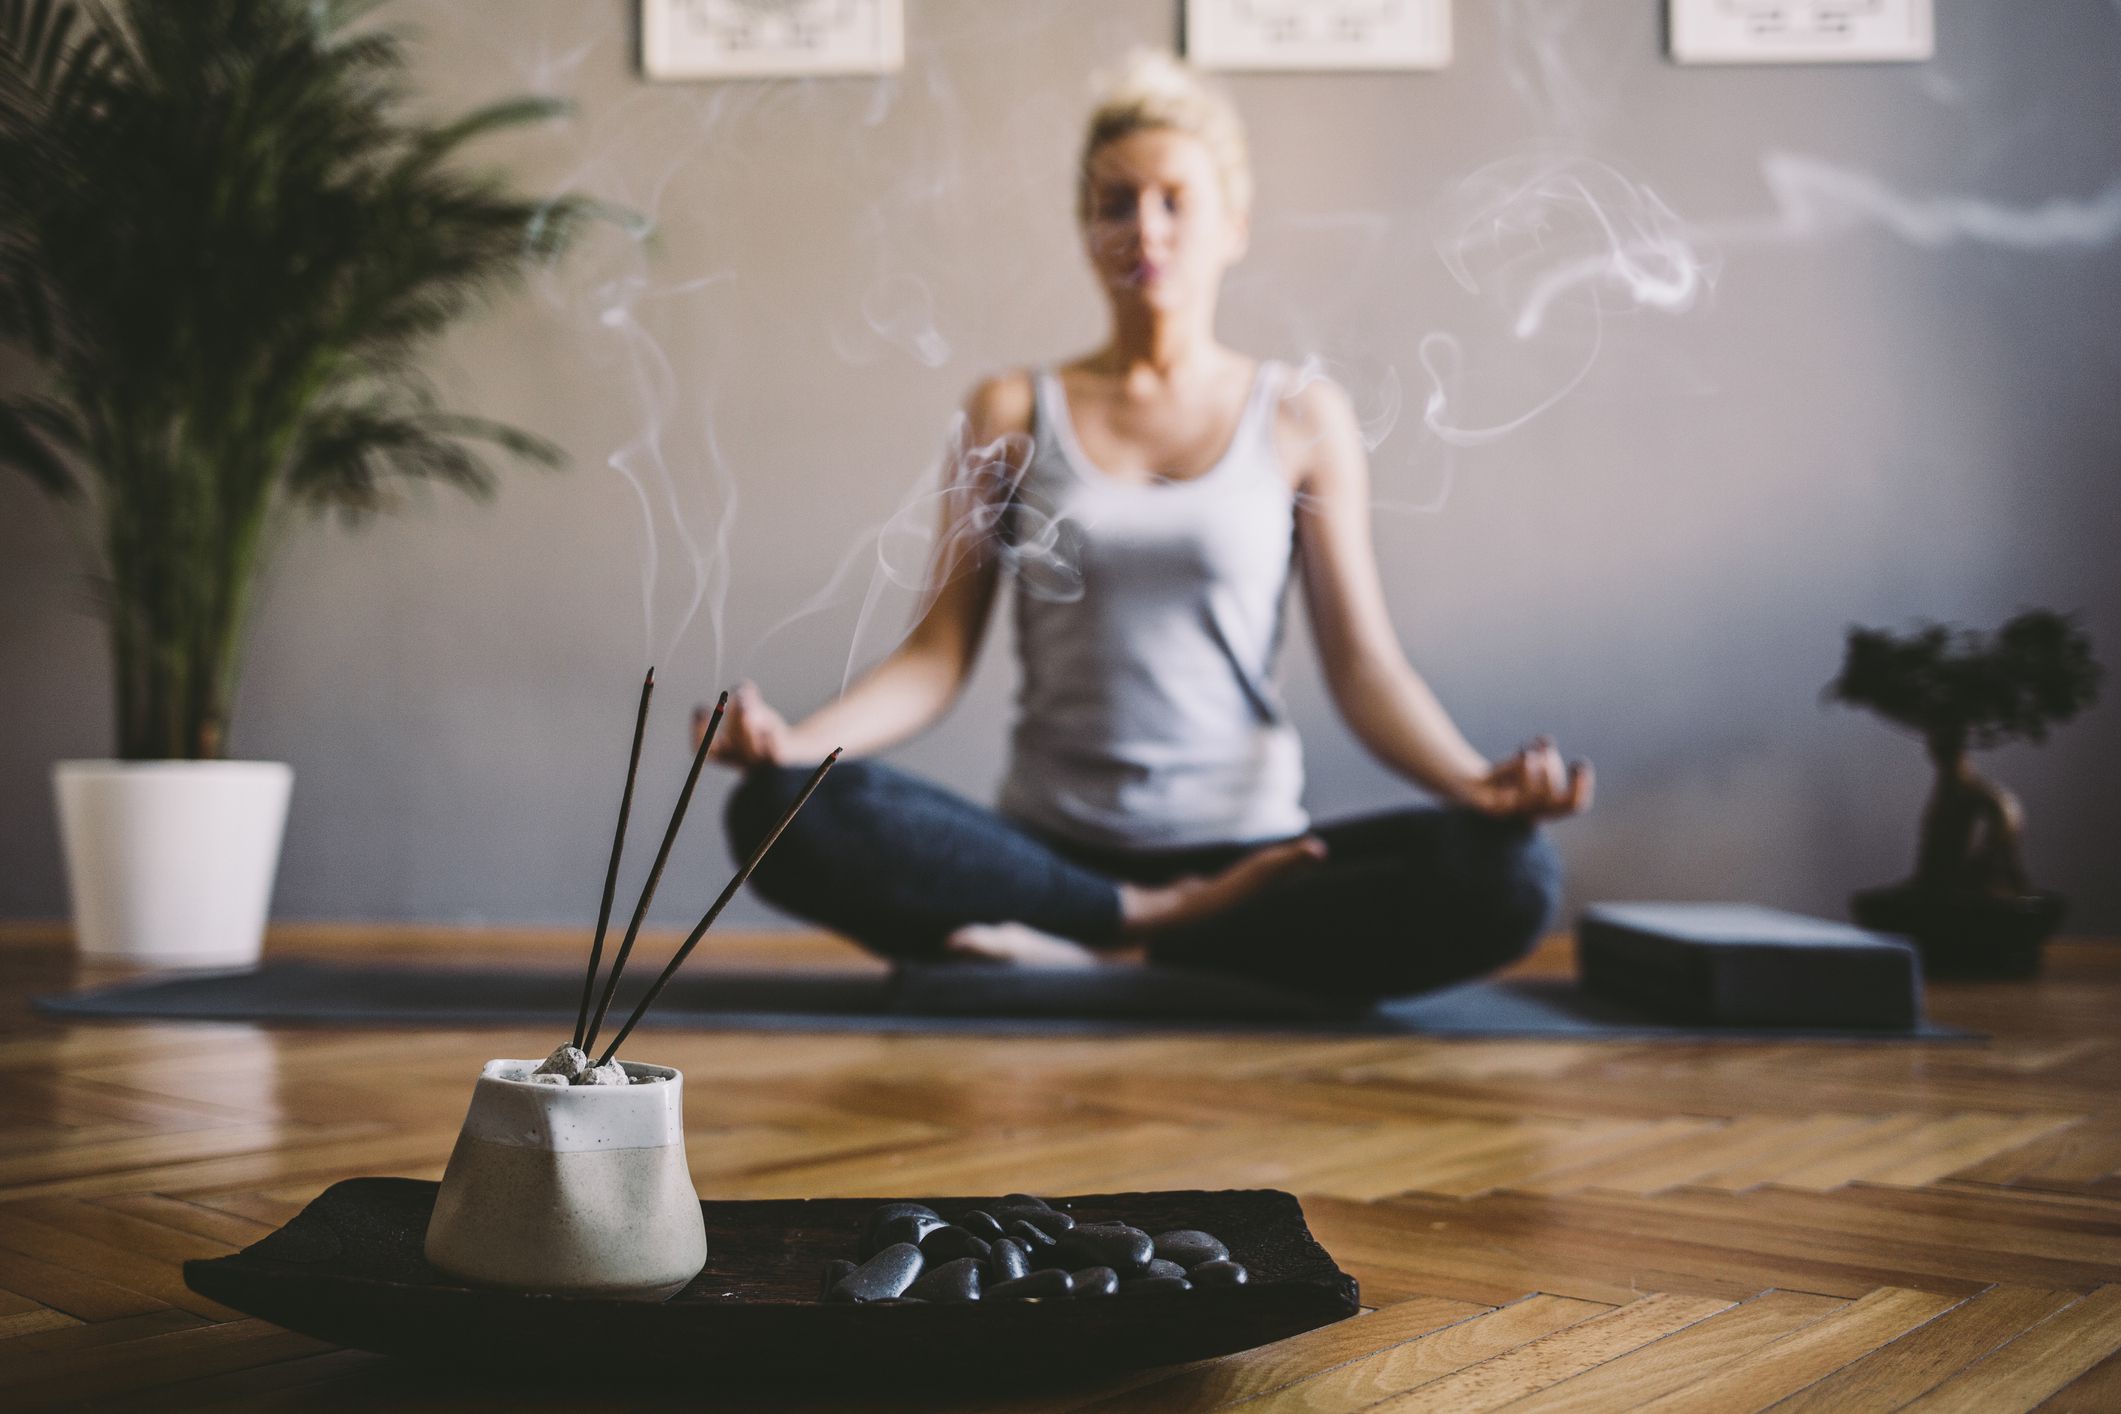 light-some-incense Ways To Practice Self-care At Home to Look After Your Emotional And Mental Well-being